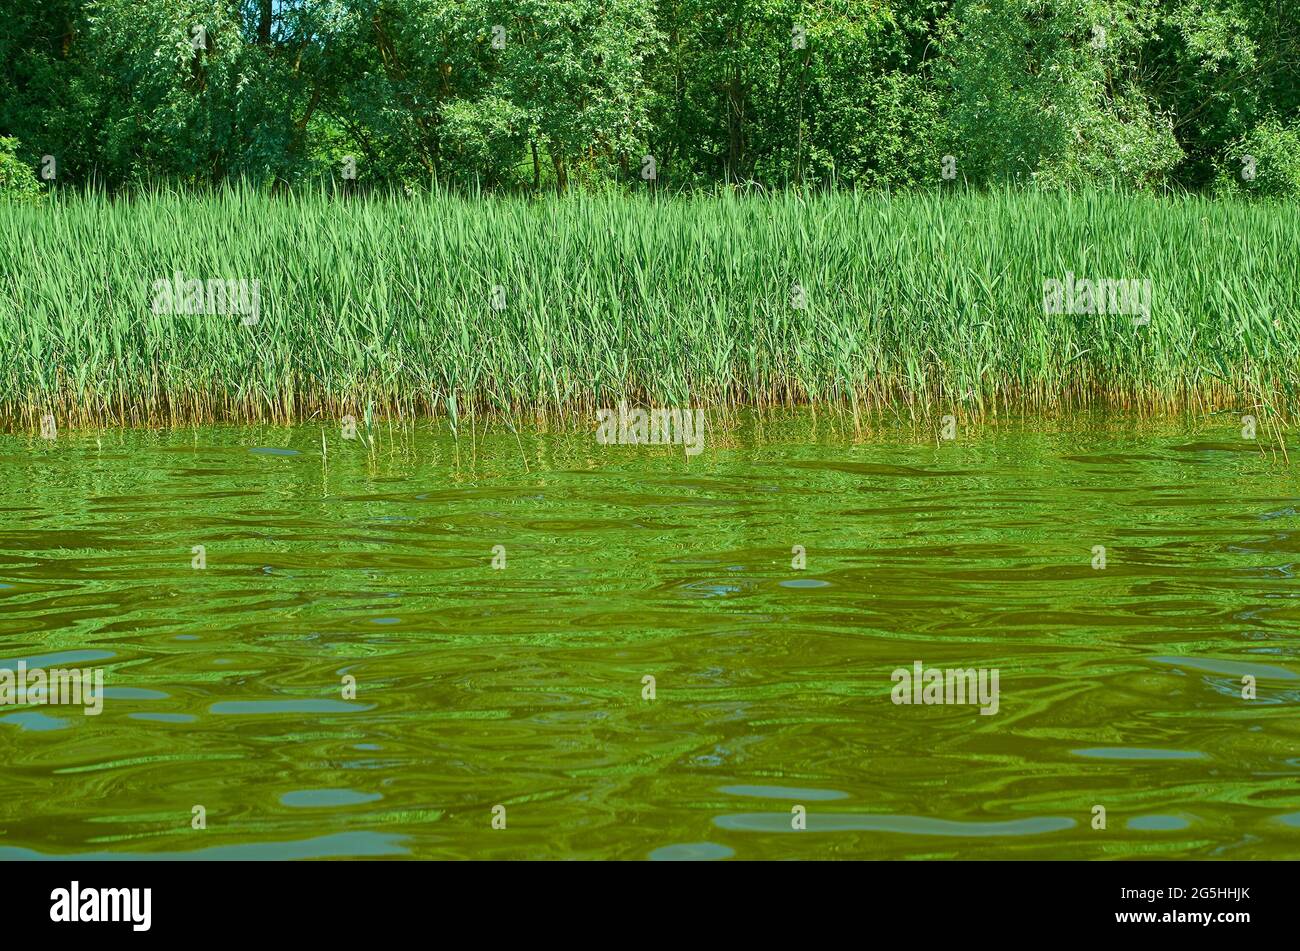 Water landscape. Sedge grows along the river bank. View from the water. Stock Photo